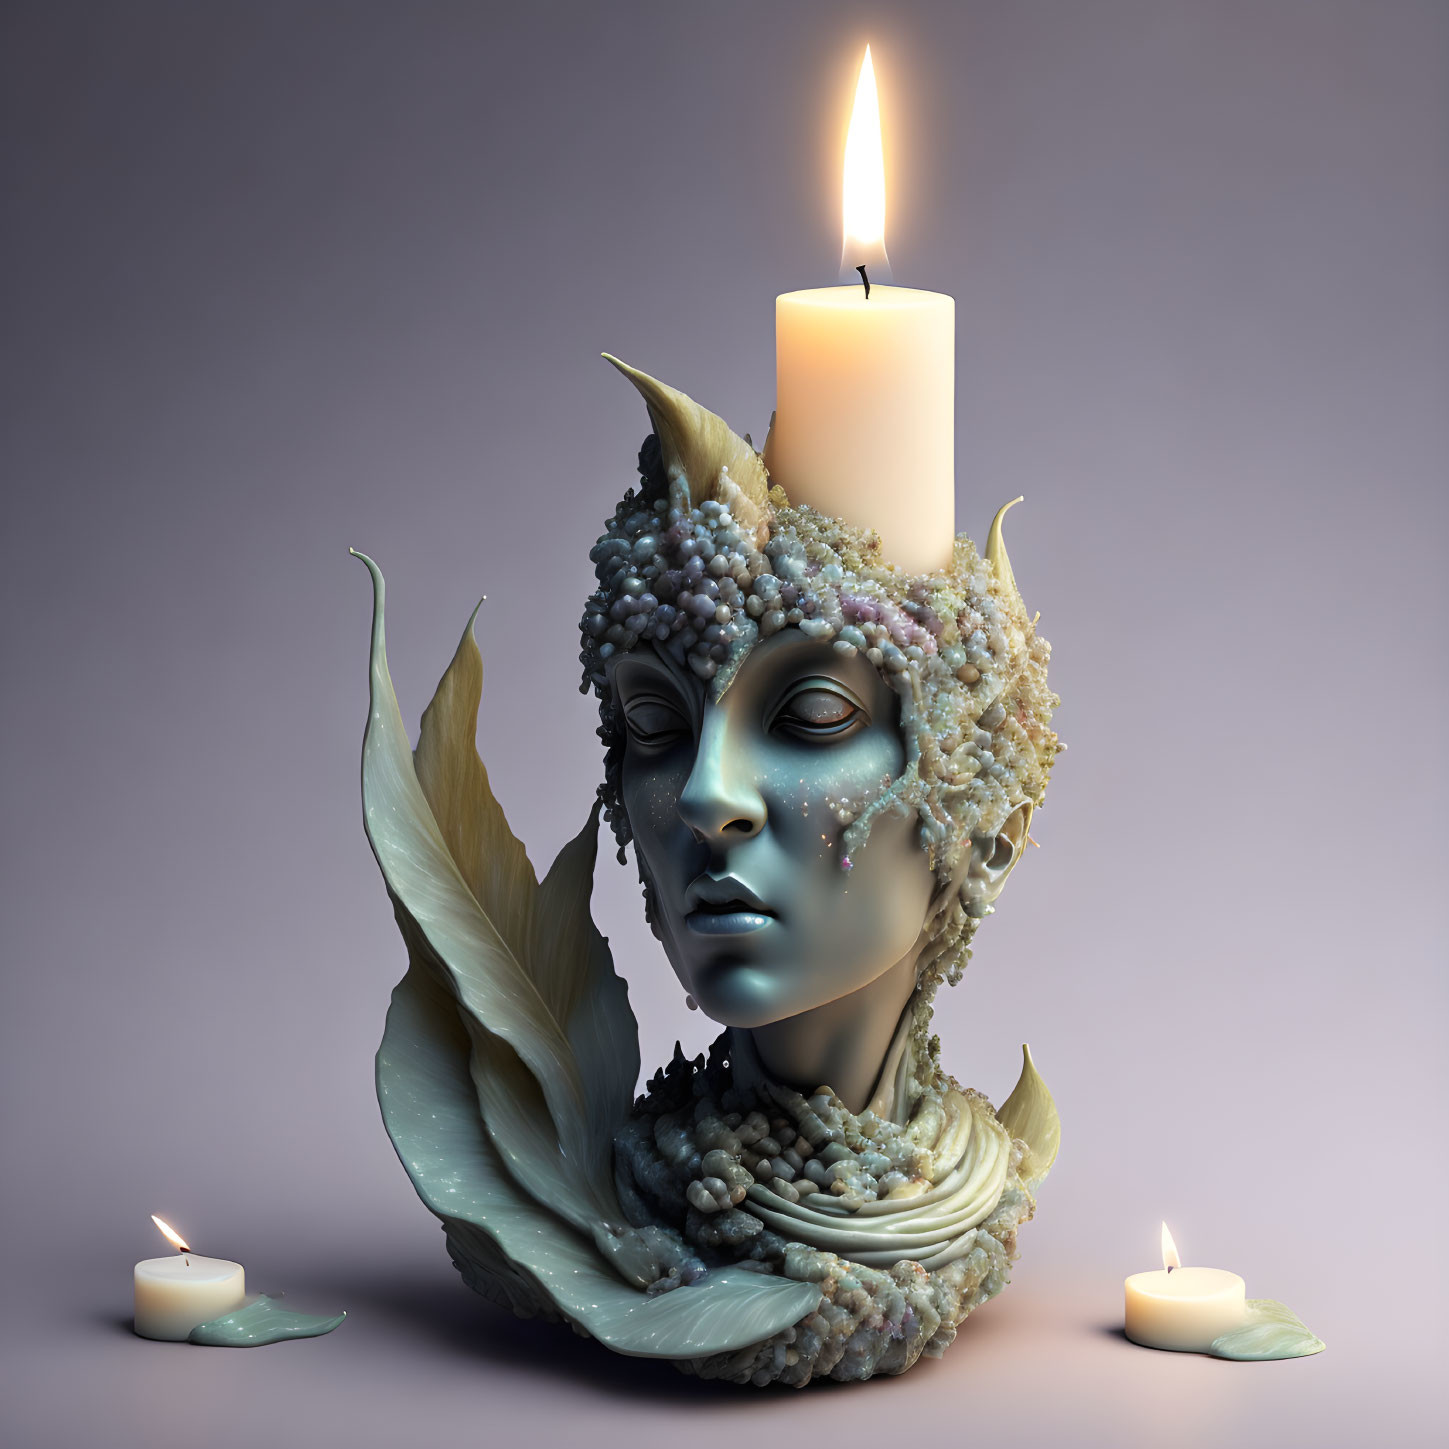 Fantasy character with serene expression, adorned with leaves, berries, and a candle